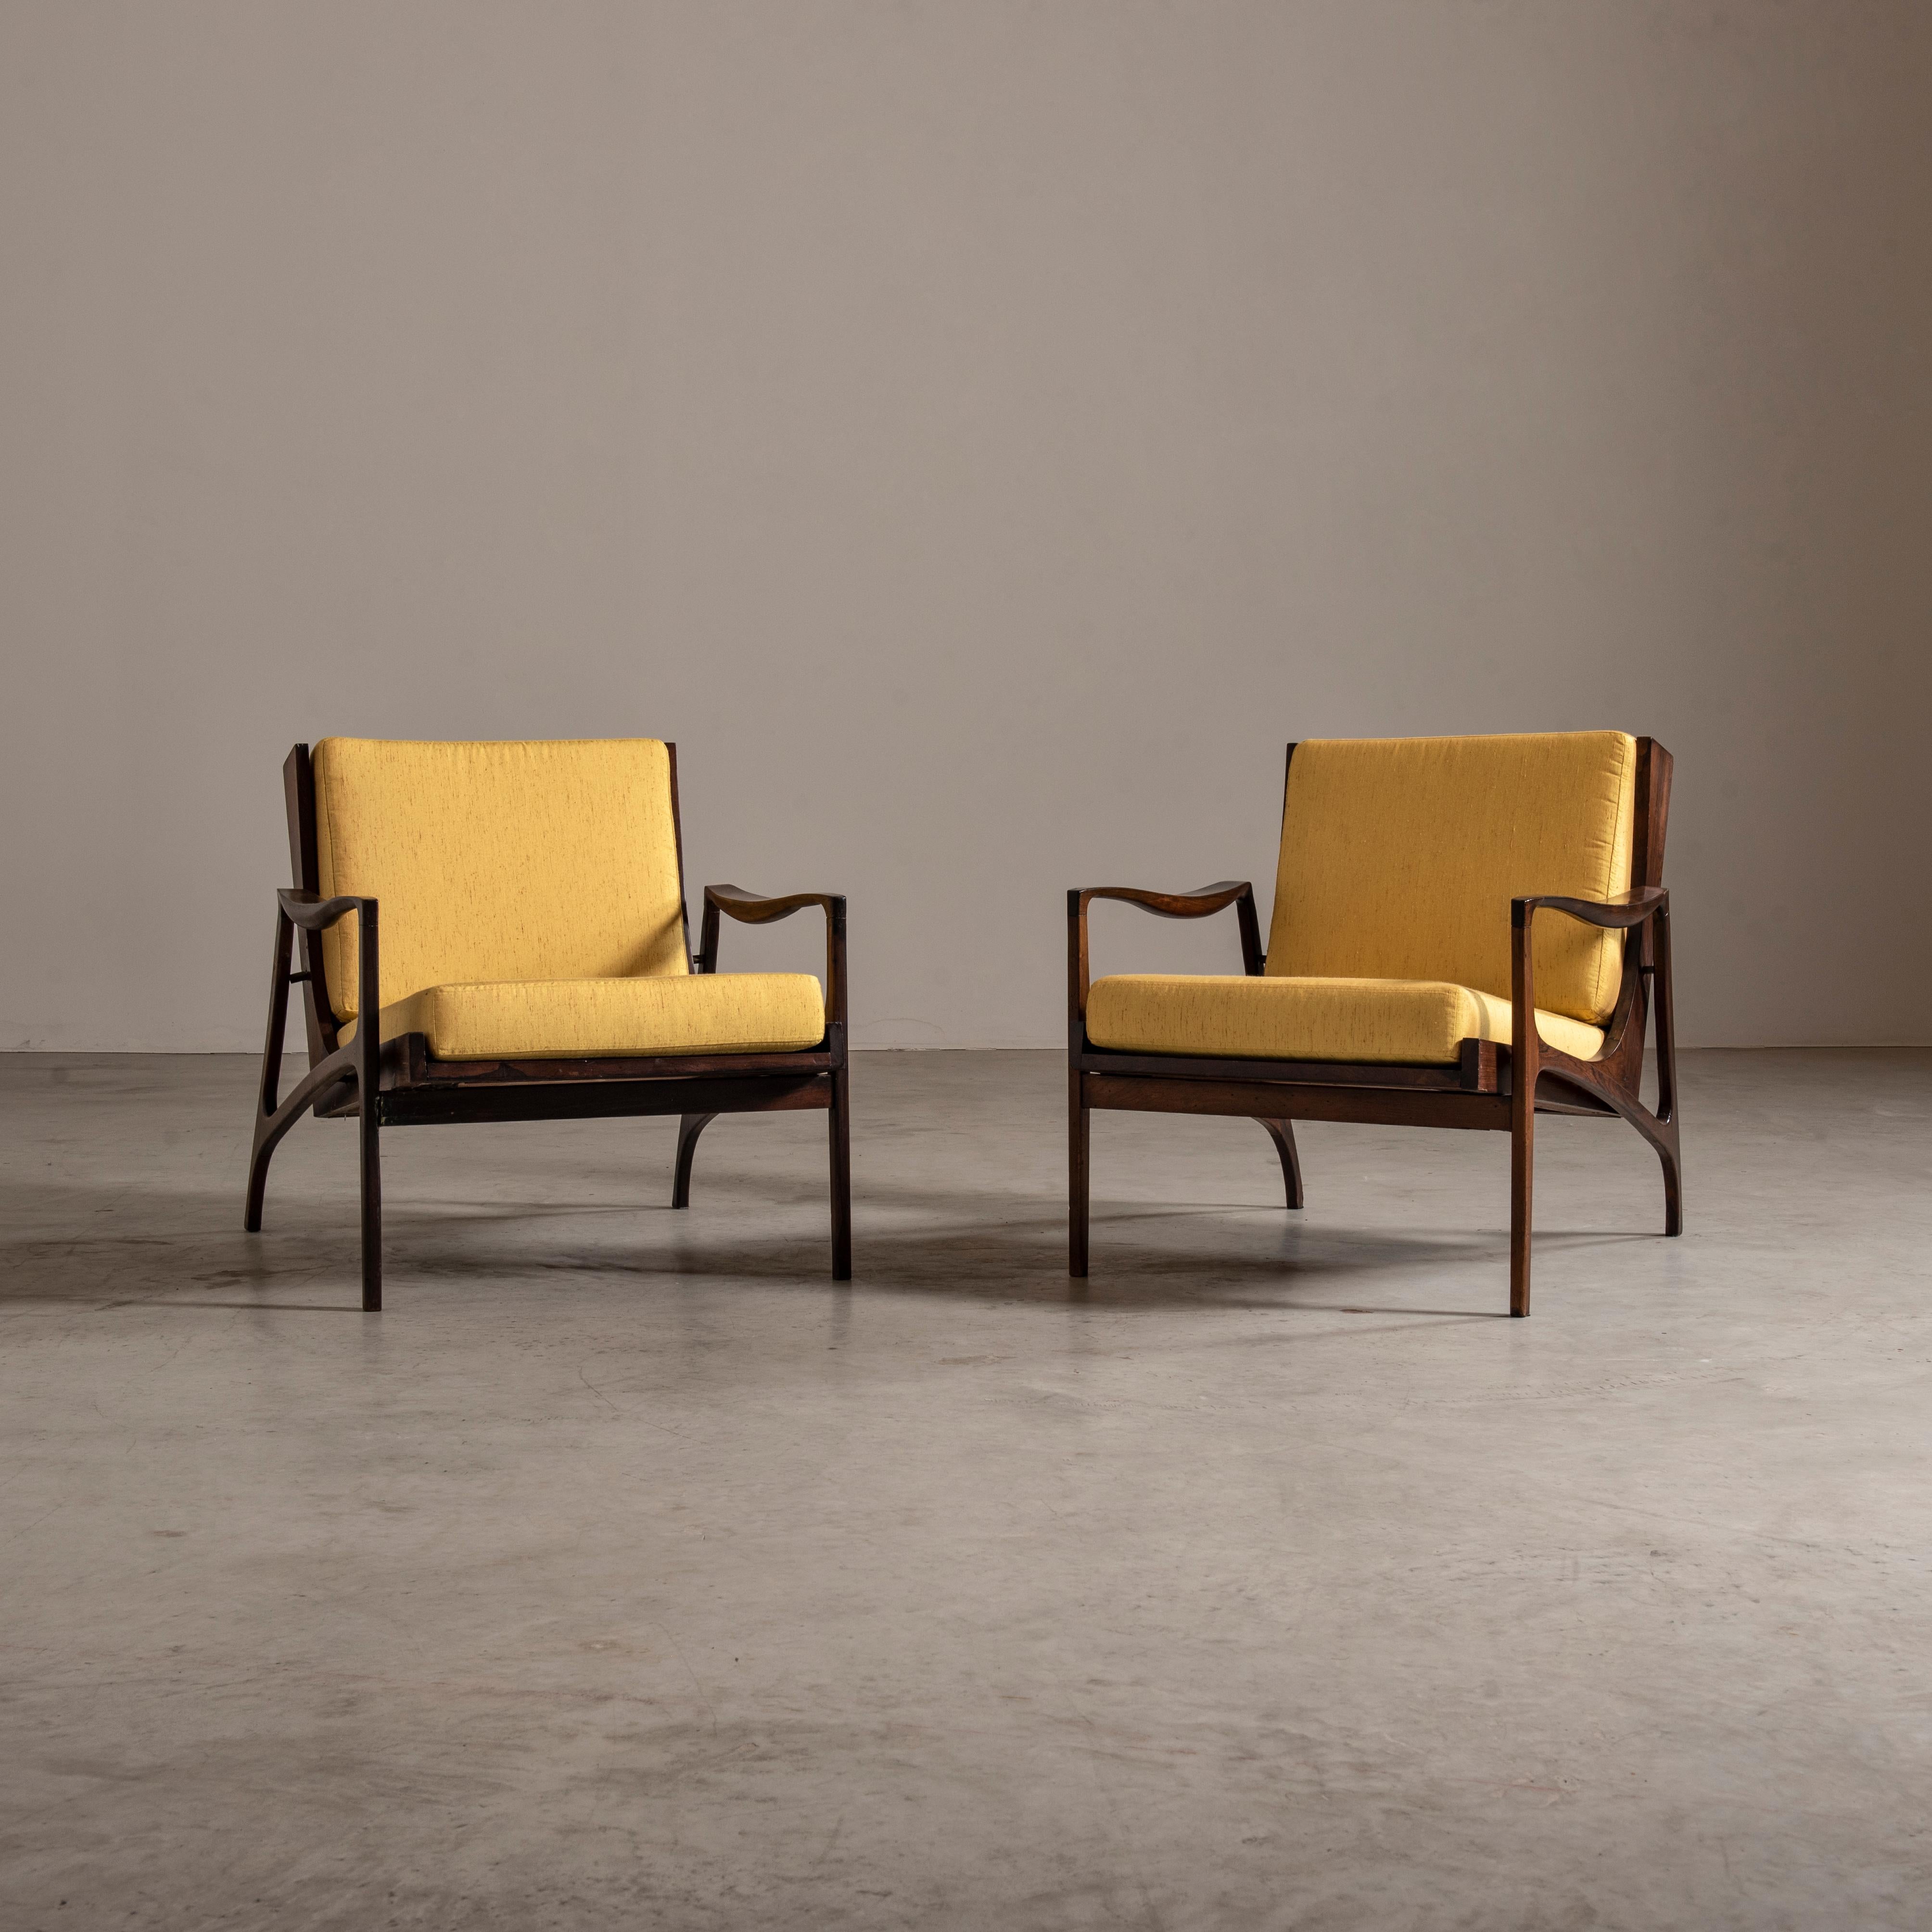 Meticulously crafted from solid Brazilian hardwood, these chairs exude an air of elegance and sophistication. Recently reupholstered in a stunning yellow fabric, they offer a vibrant pop of color that effortlessly revitalizes any interior.

With